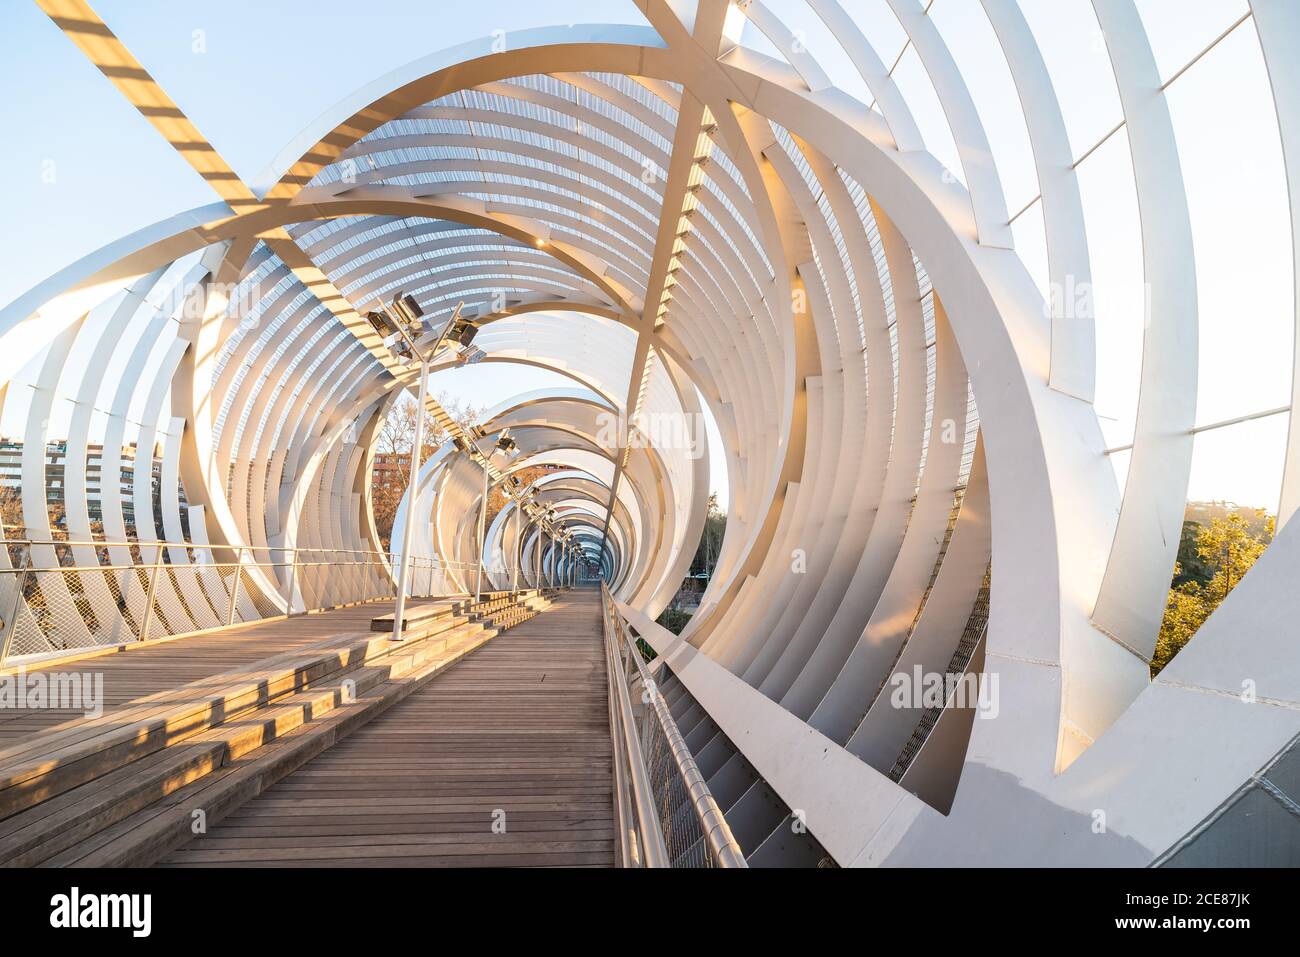 Perspective inside passage of helical cone shaped Arganzuela bridge with internal metal intertwined spirals crossing diagonally in sunset time in Madrid Stock Photo